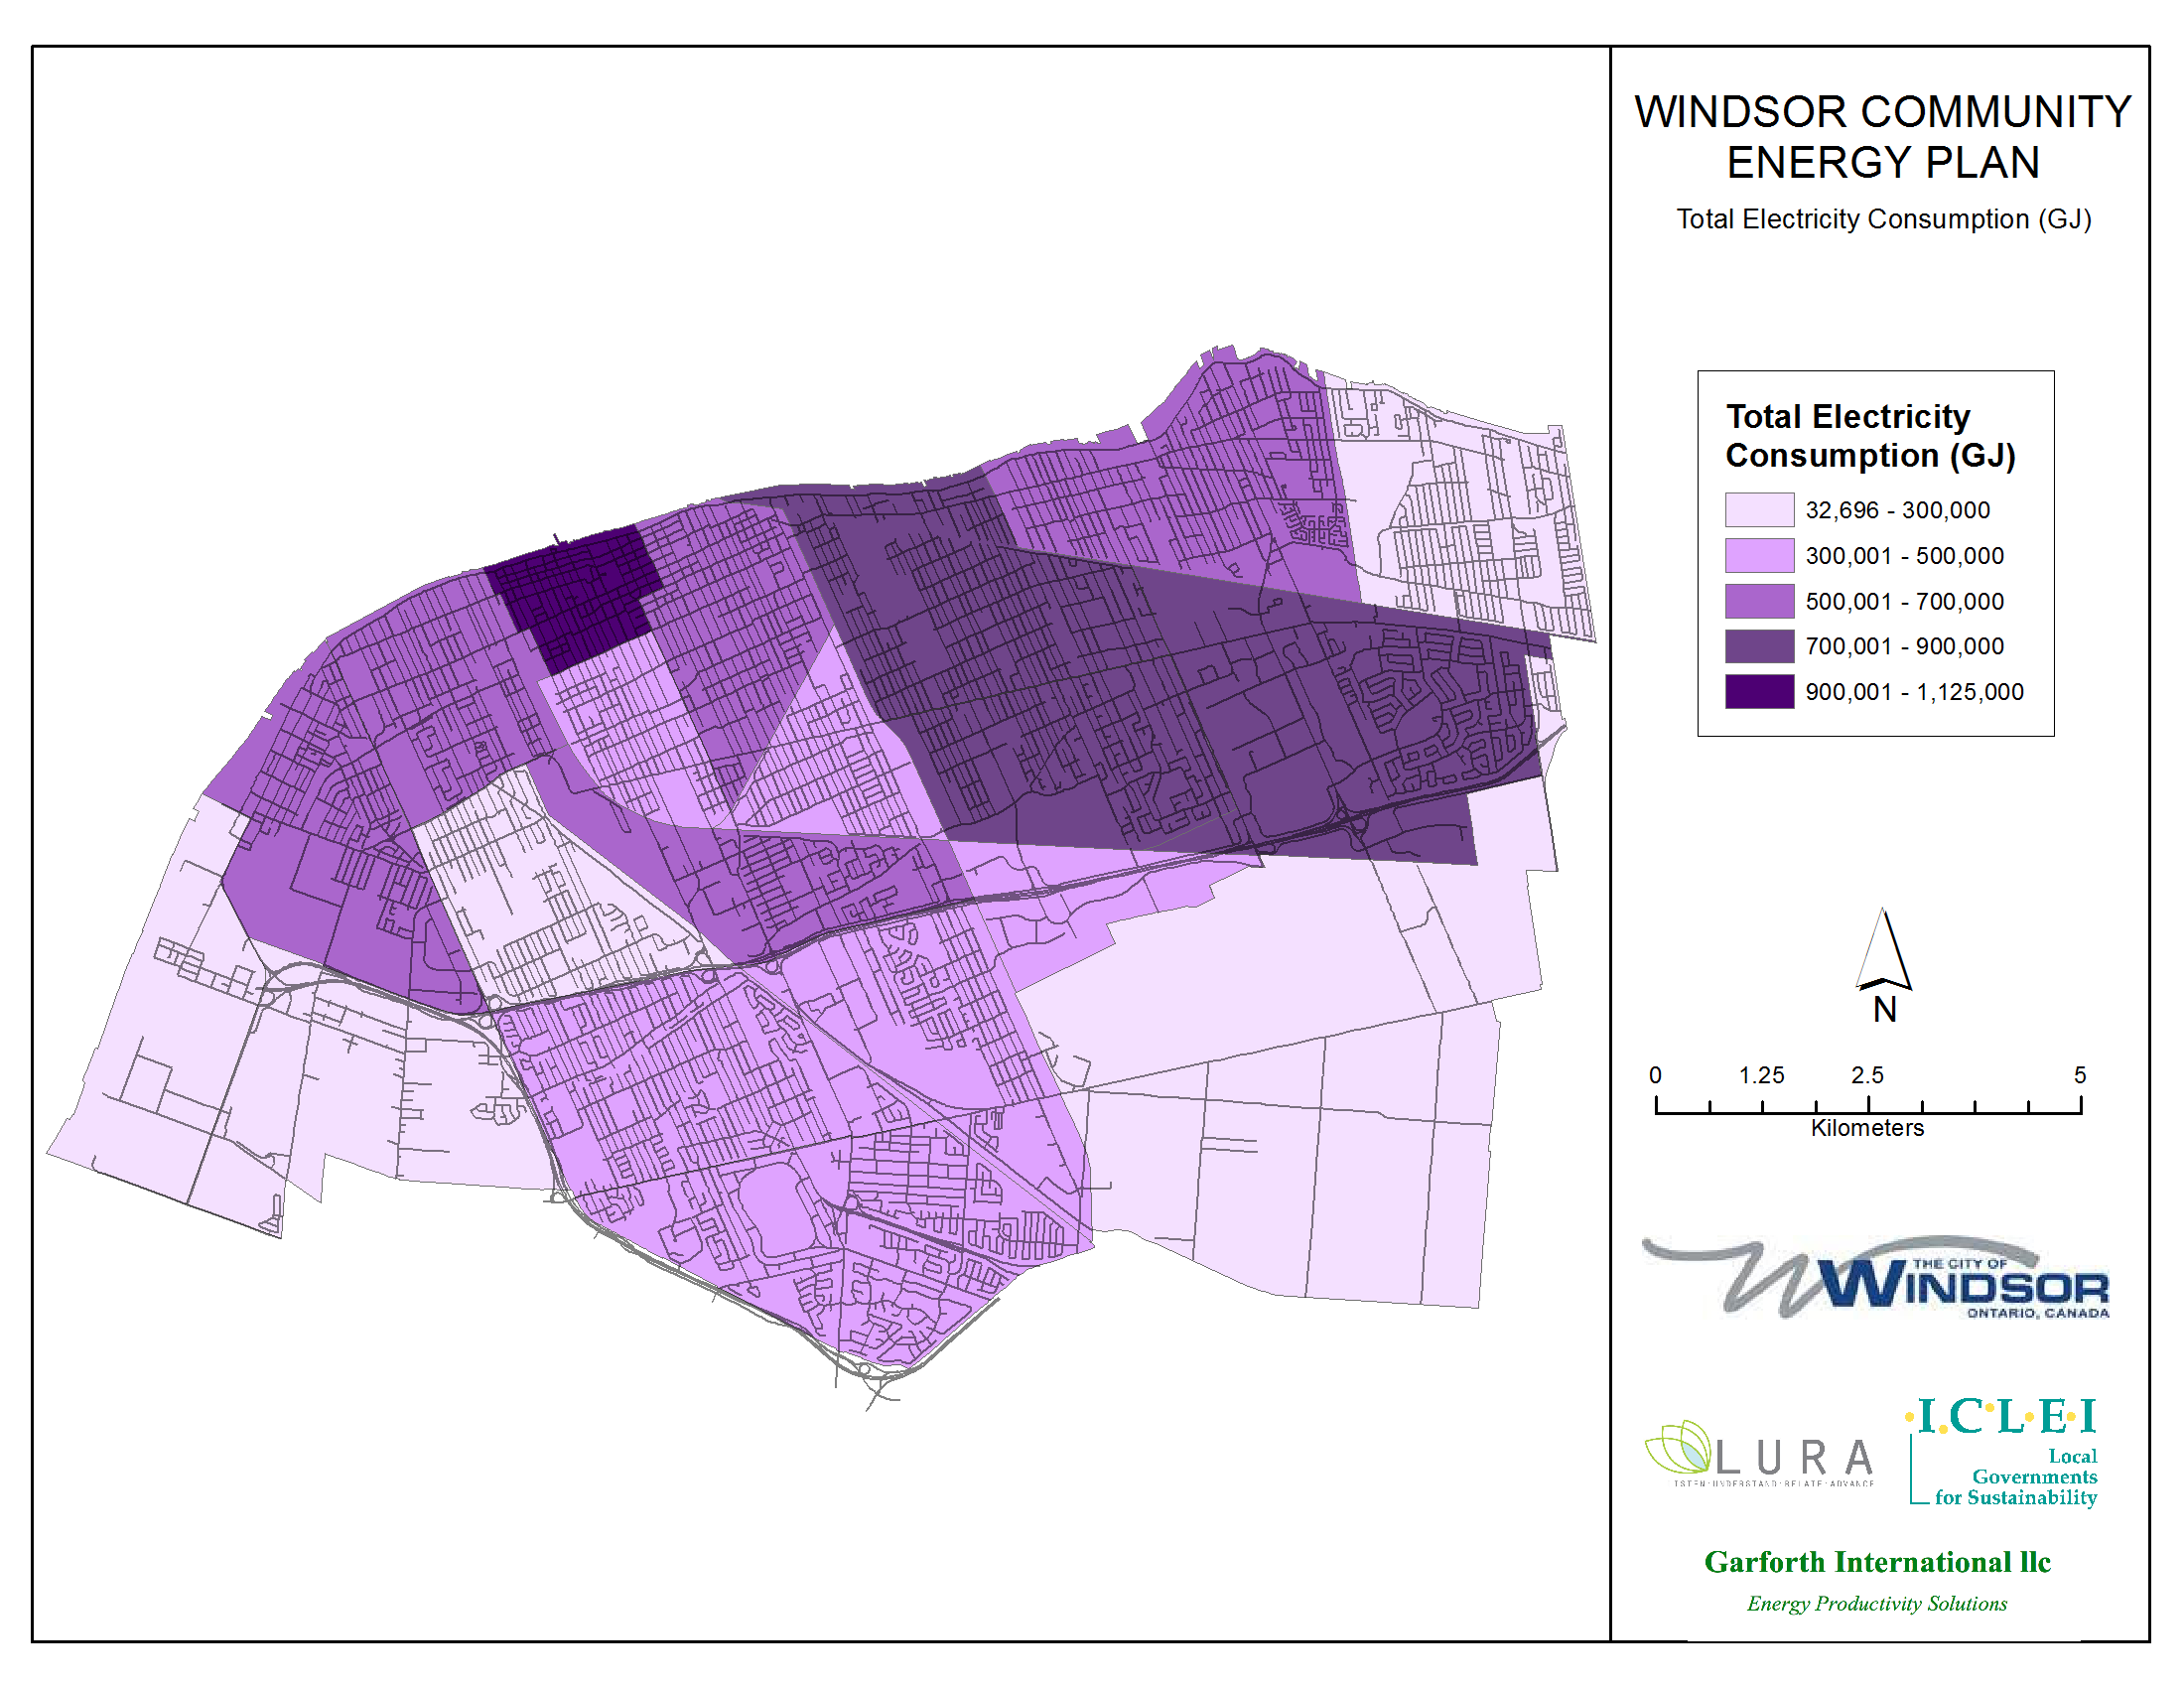 Thumbnail map of total electricity consumption within the City of Windsor